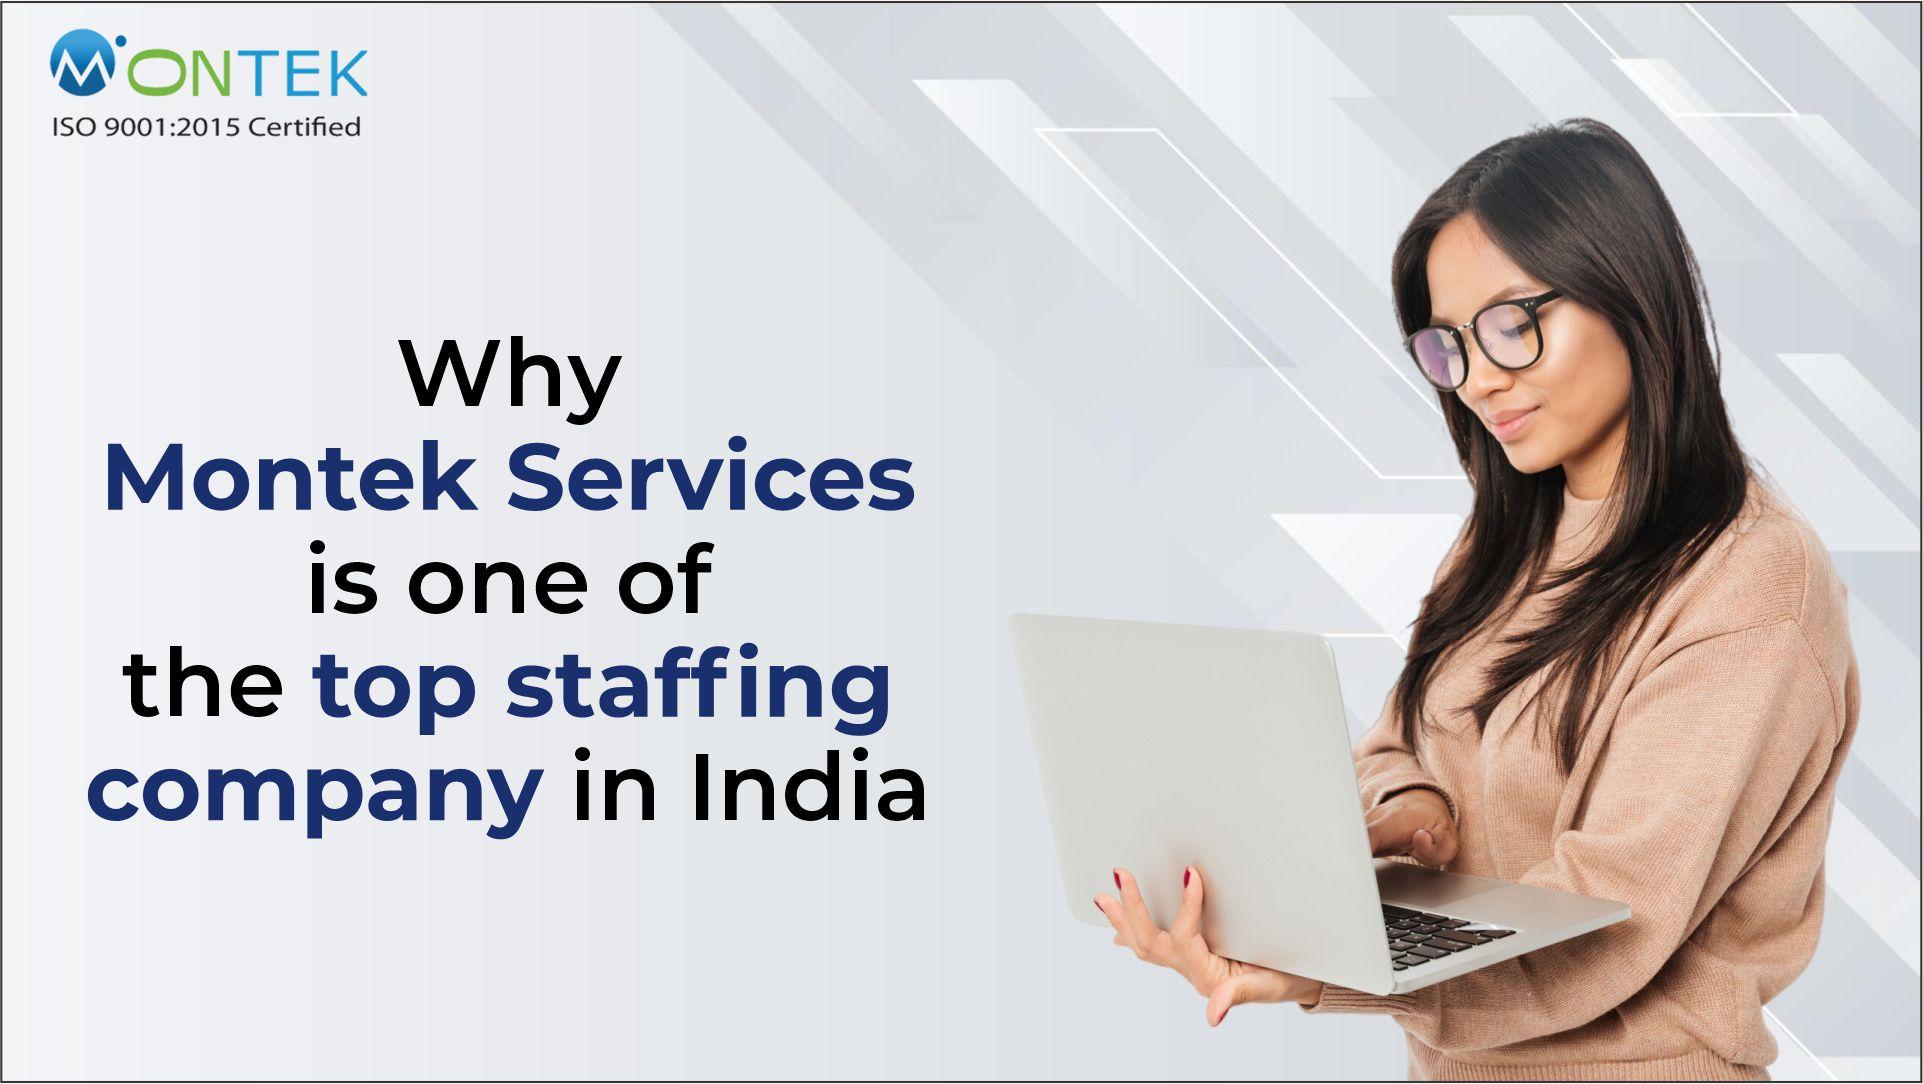 Why Montek Services is one of the top staffing company in India